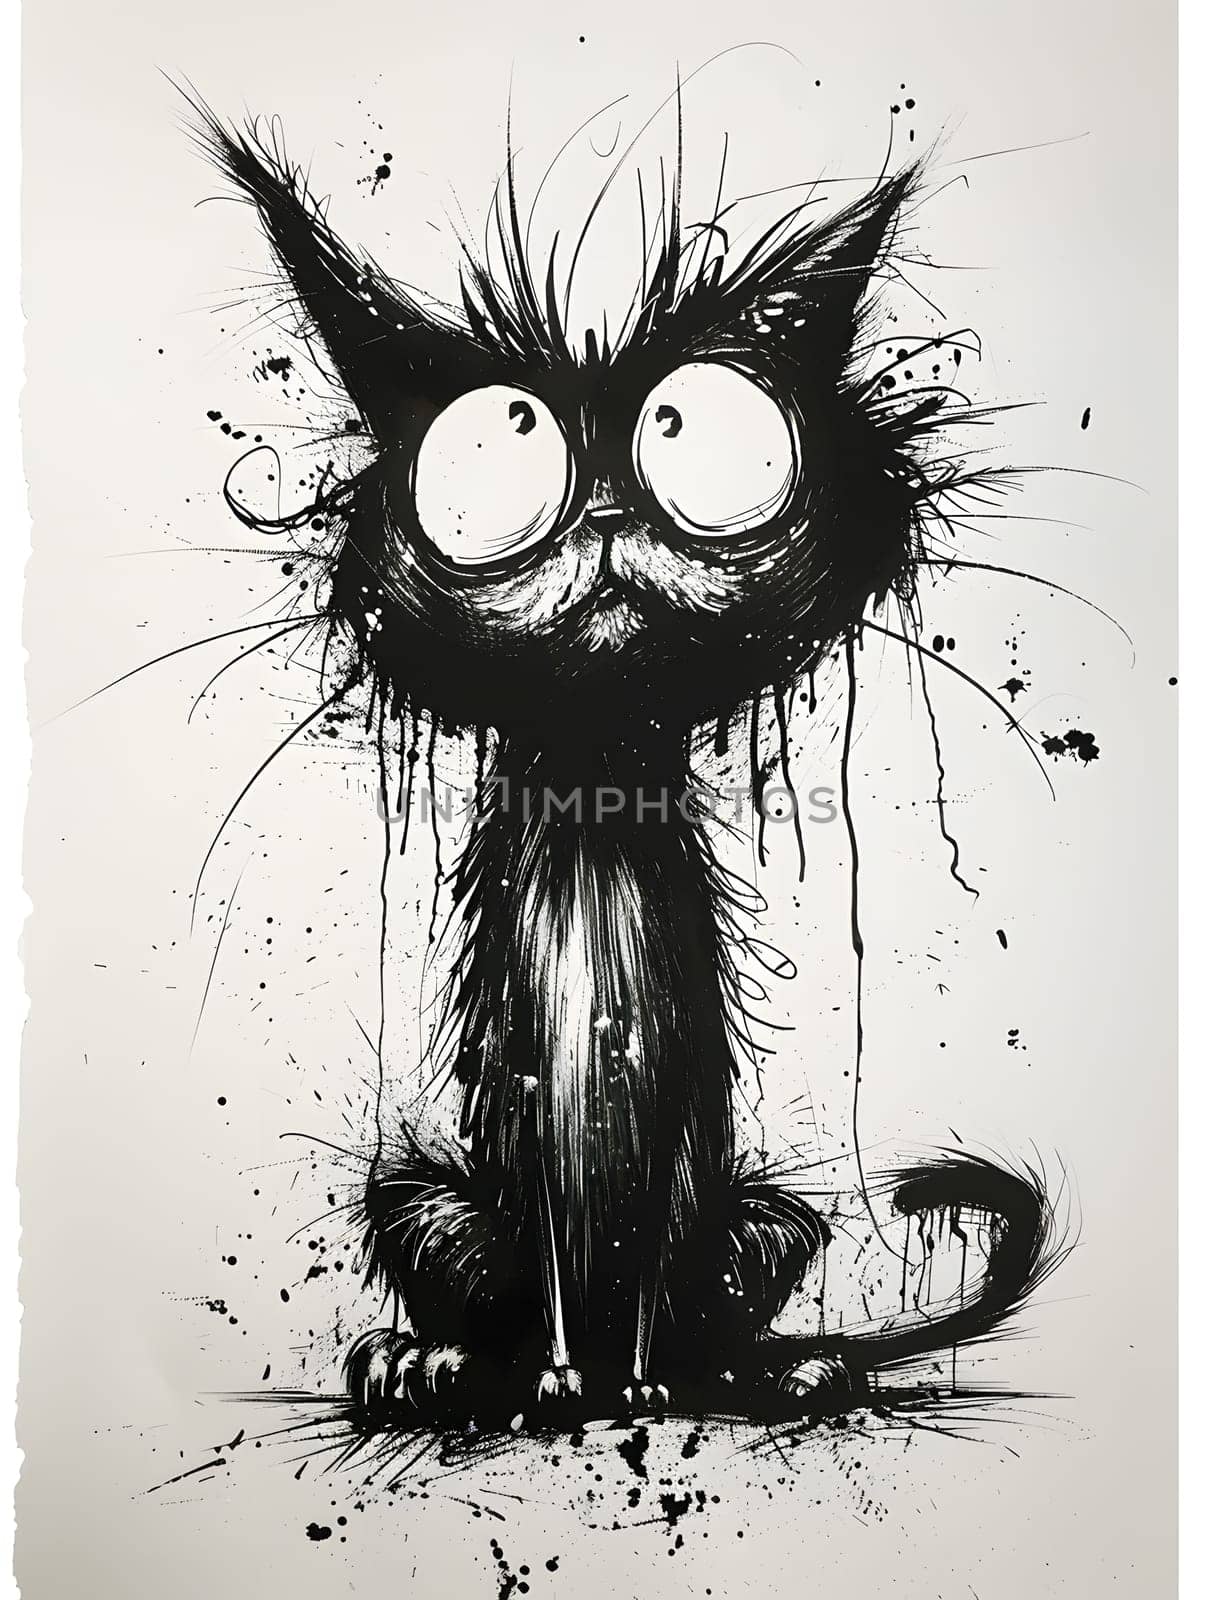 A monochrome illustration of a Felidae cat with big eyes and whiskers. This small to mediumsized cat is depicted in a black and white drawing, showcasing the art of visual arts and painting